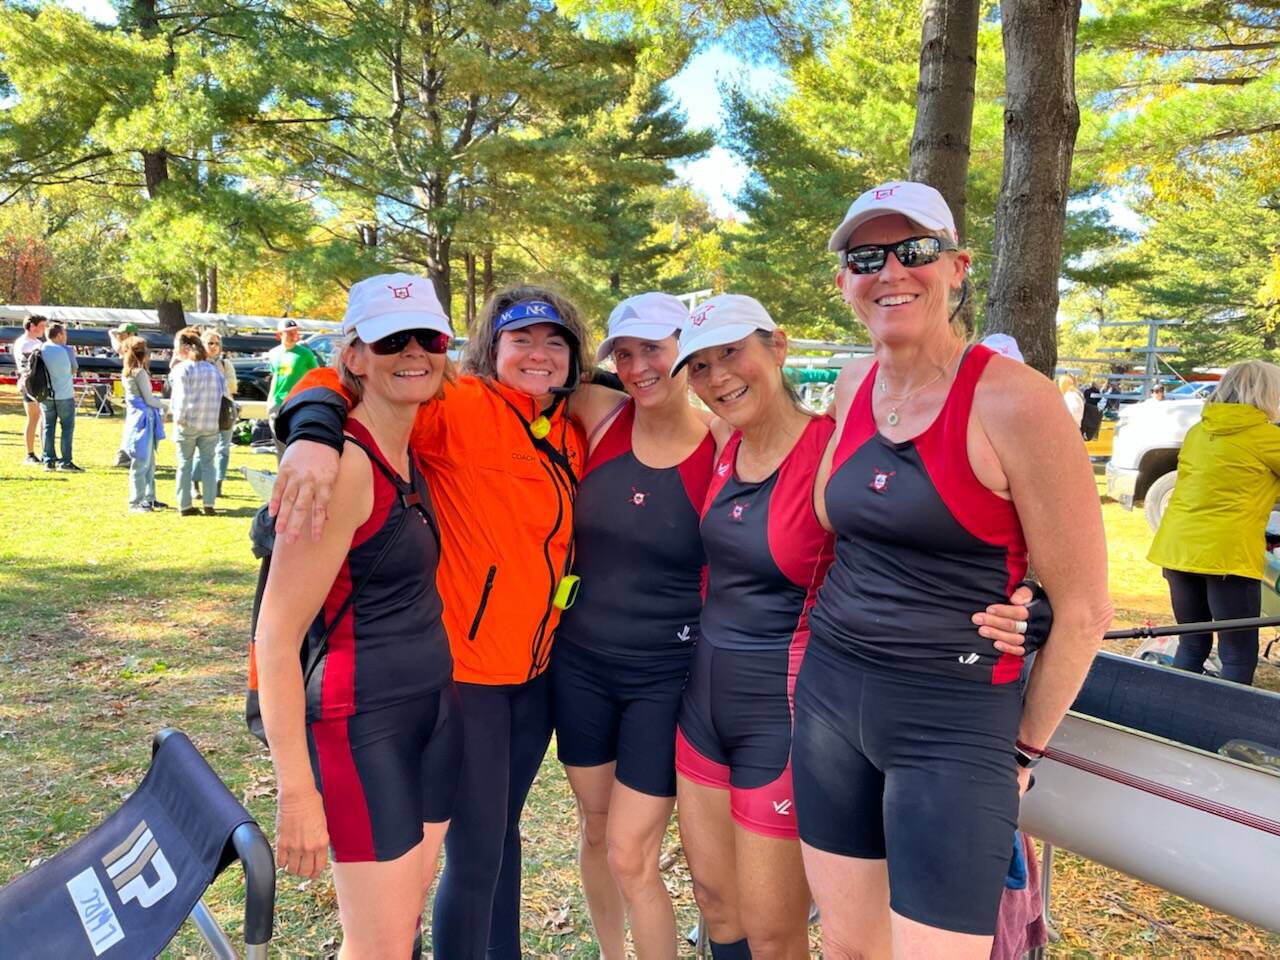 Submitted photo 
Sequim Yacht Club member Jeanne Neal, center, joined teammates (from left) Gunilla Luthra, Brook McCulloch (cox) Jan Chow and Sara Harmon in the Head of the Charles 2022 regatta in October. The team placed 14th out of 20 teams in the Women’s Grand Master Fours (60+) division.